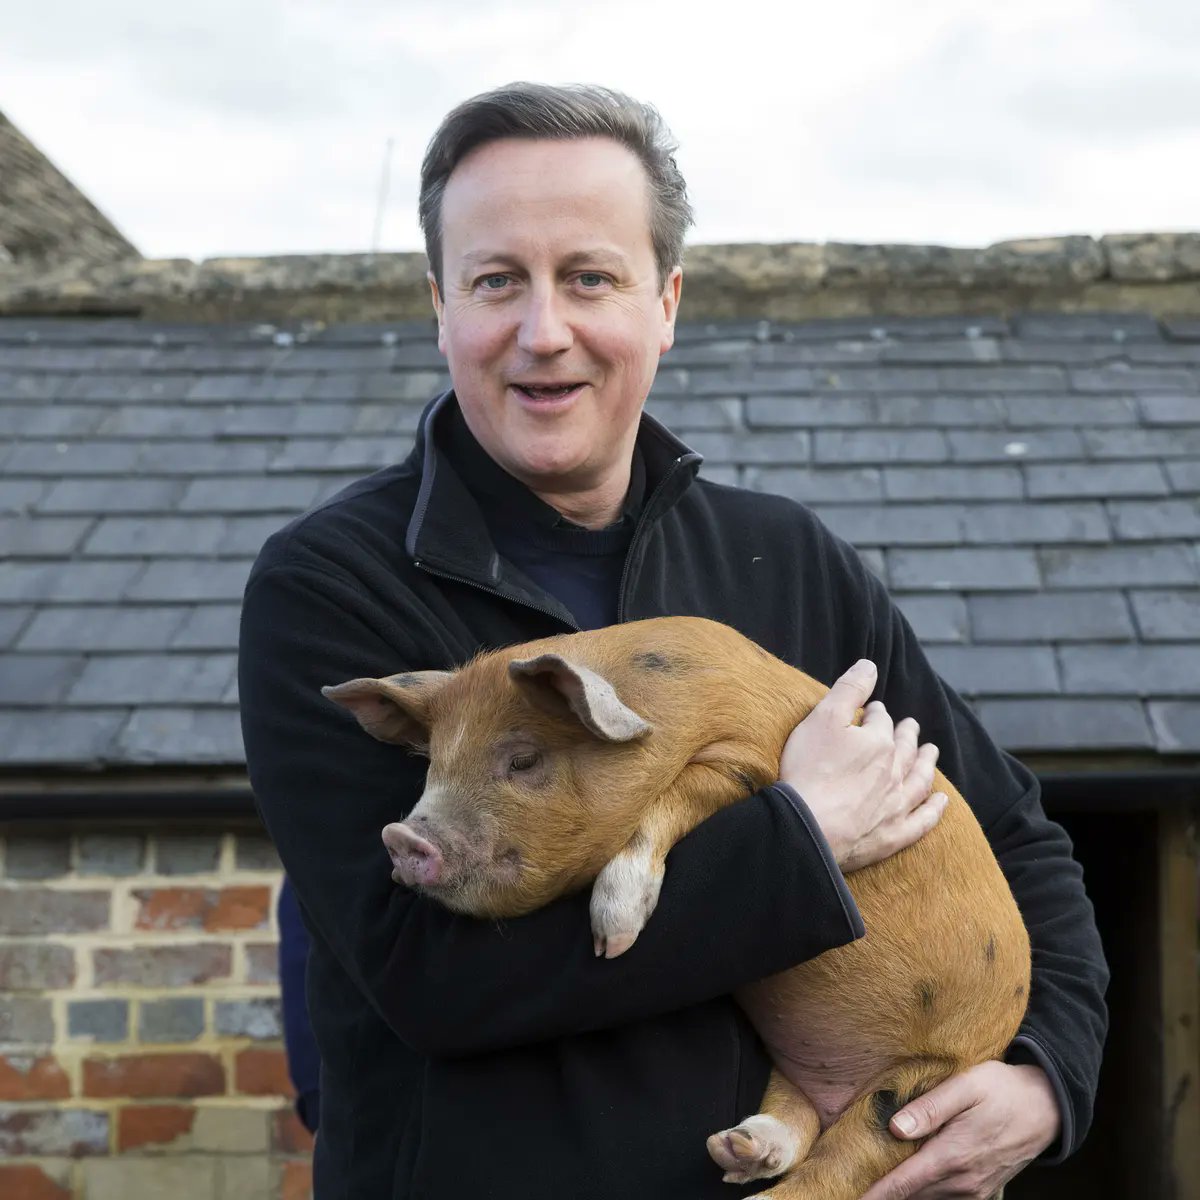 There is an old PM called Dave
Who’s prone to a porcine sex rave
Though he once shagged a pig
Sunak’s got him a gig
And told him he’s got to behave

#TheLimerickQueen #DavidCameron #reshuffle #Sunak #ForeignSecretary #cabinetreshuffle #ToriesOut #GeneralElectionN0W